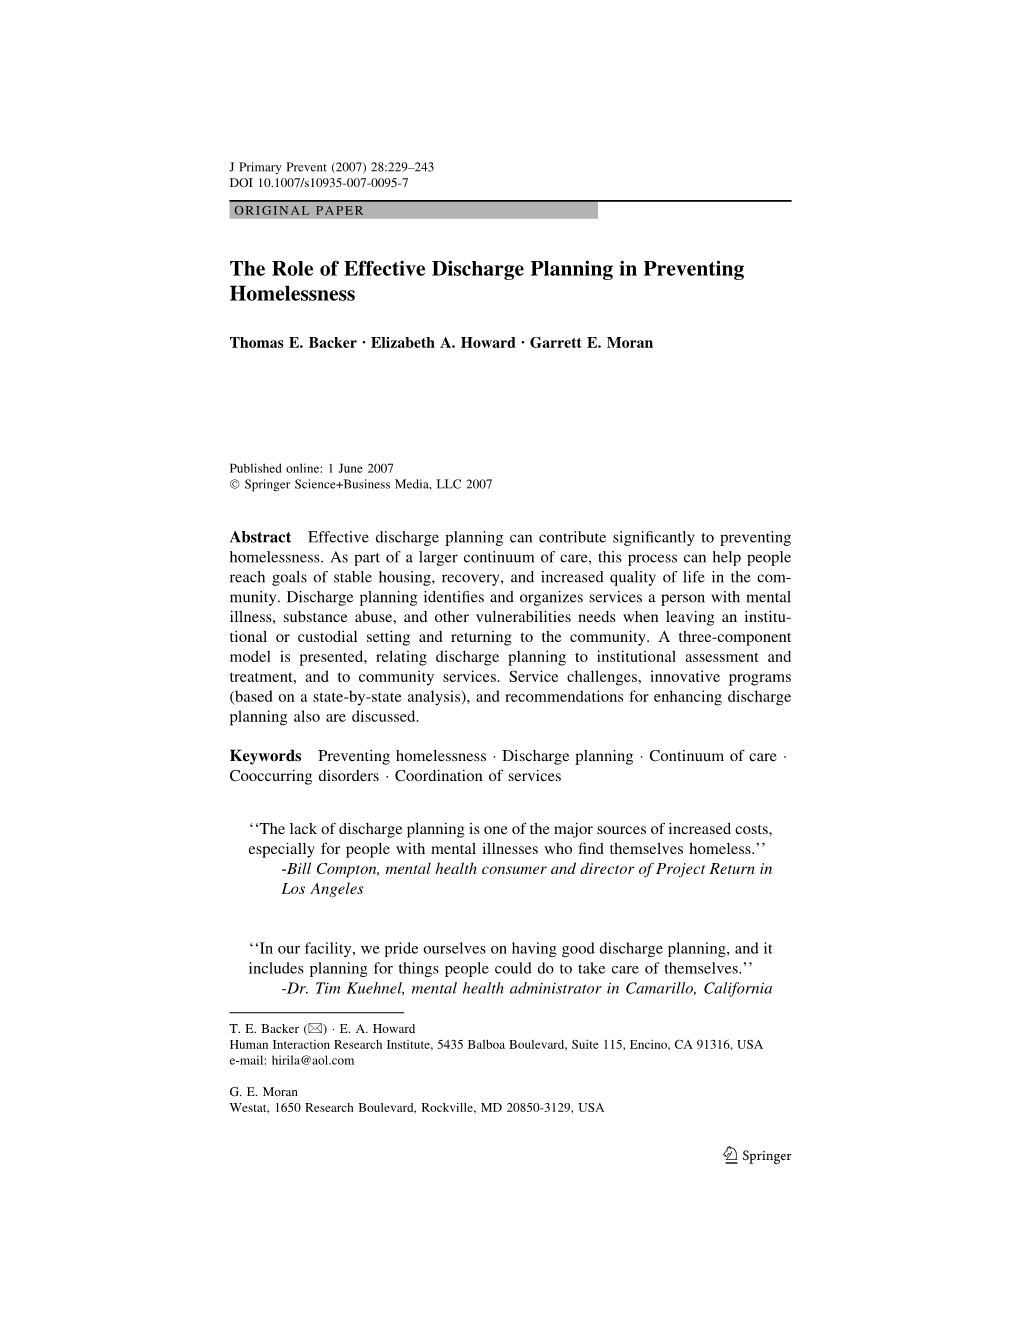 The Role of Effective Discharge Planning in Preventing Homlessness